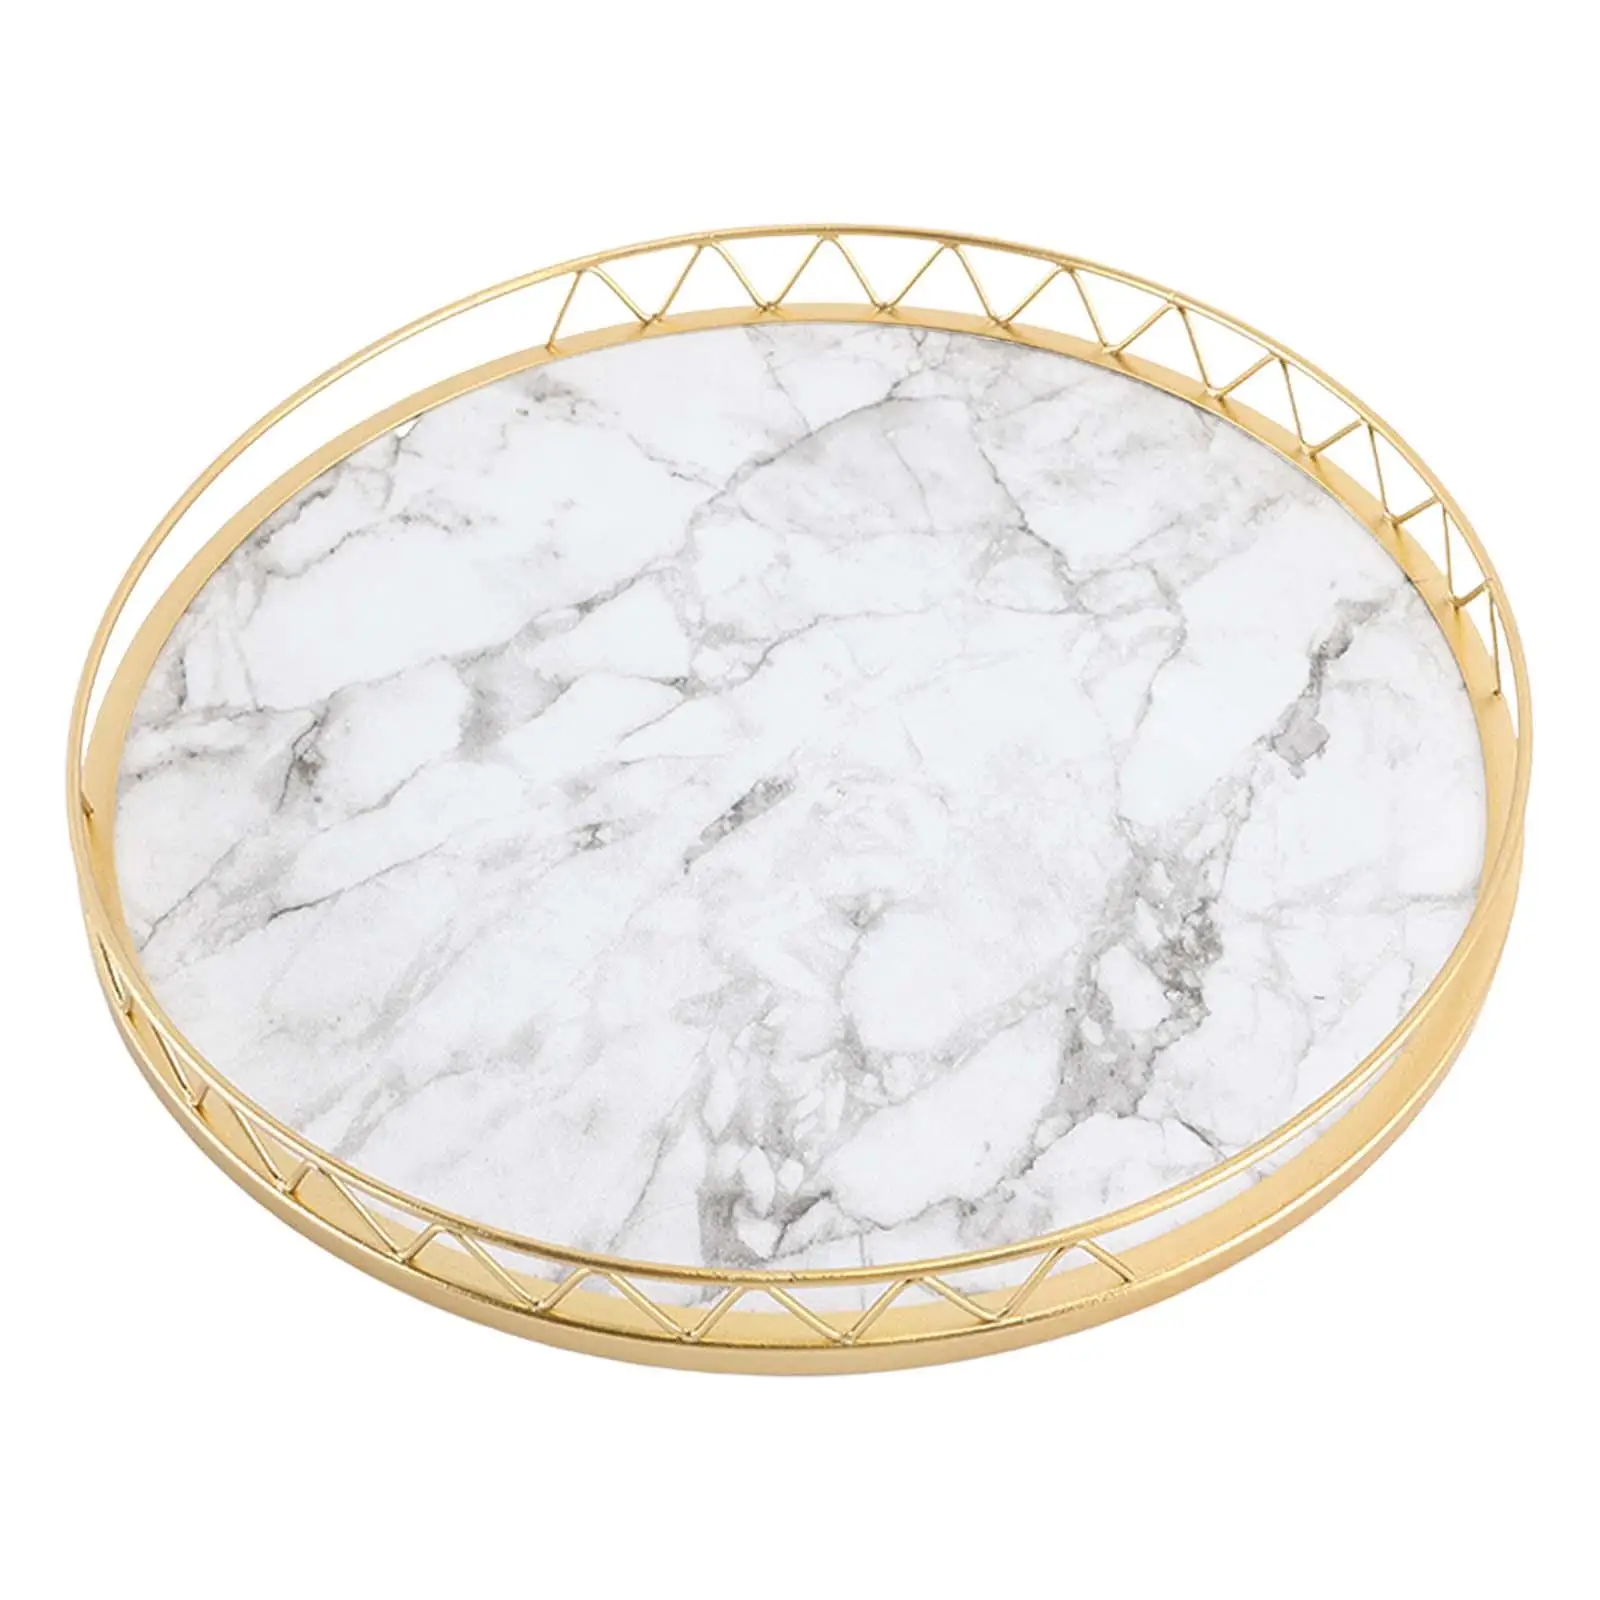 Marble Texture Tray Cupcake Plates Vanity Decorative Tray for Coffee Table